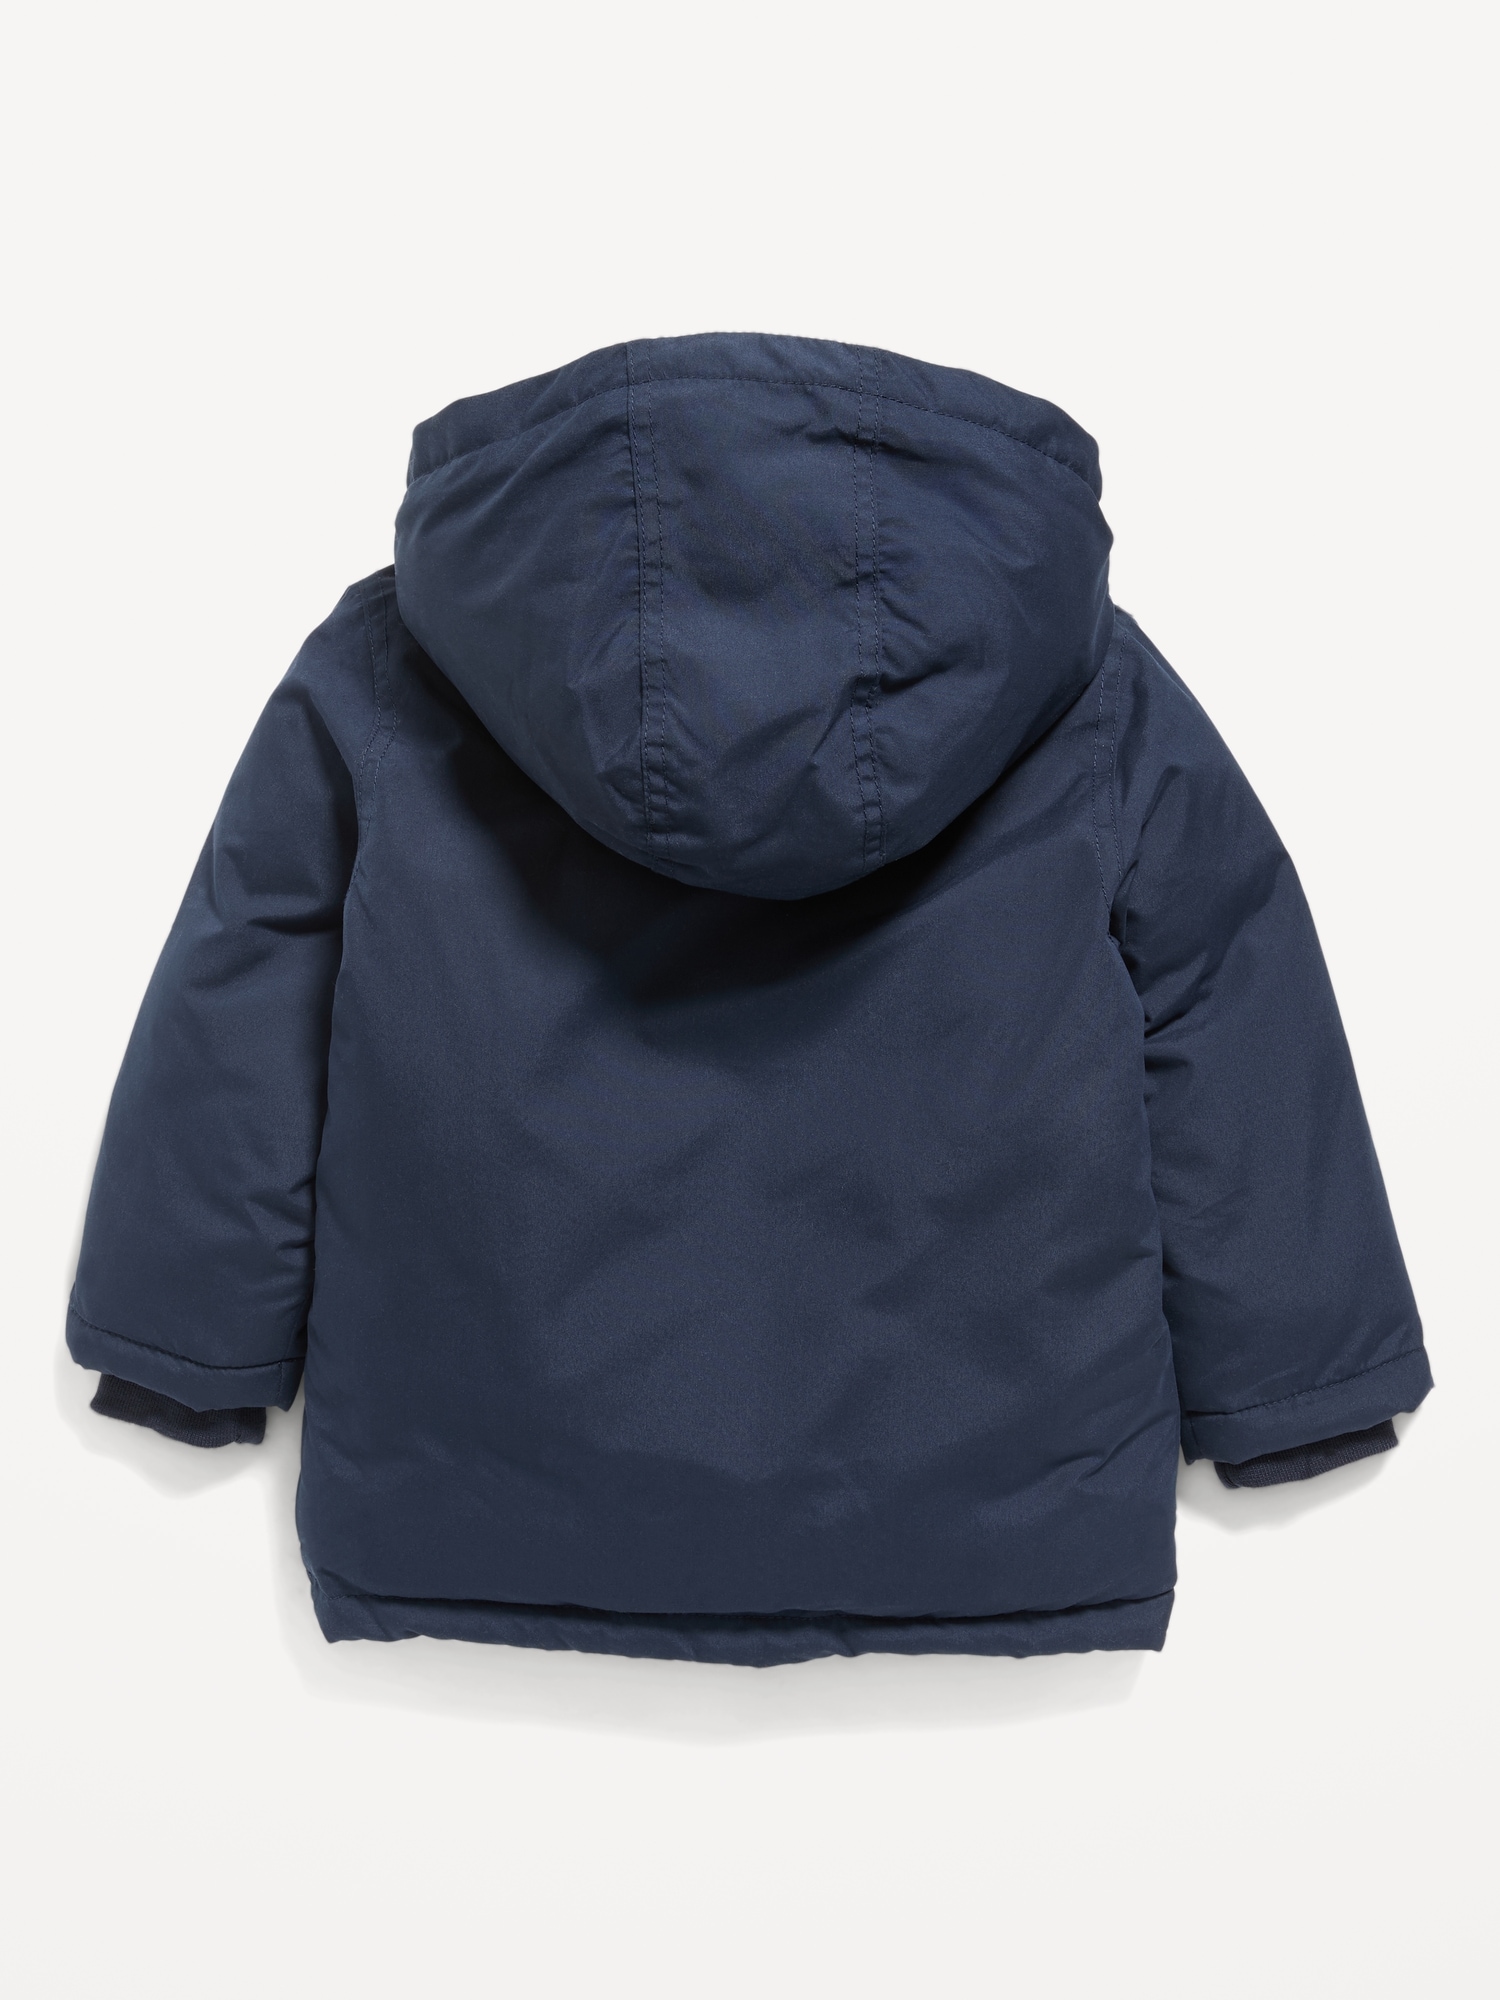 Unisex Hooded Zip-Front Water-Resistant Jacket for Toddler | Old Navy